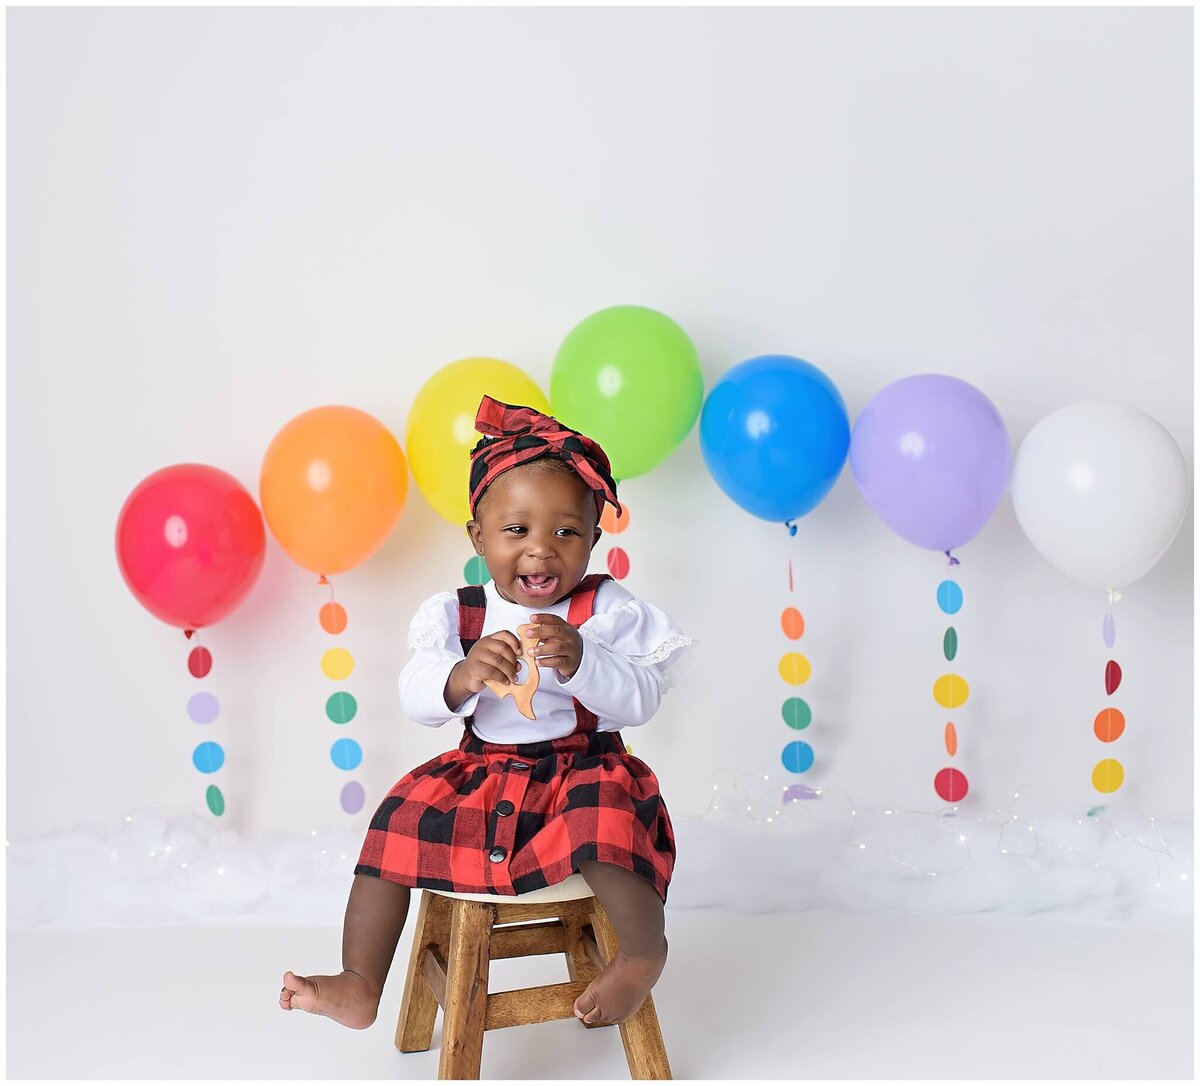 A charming studio phot session capturing the innocence and playfulness of a toddler.